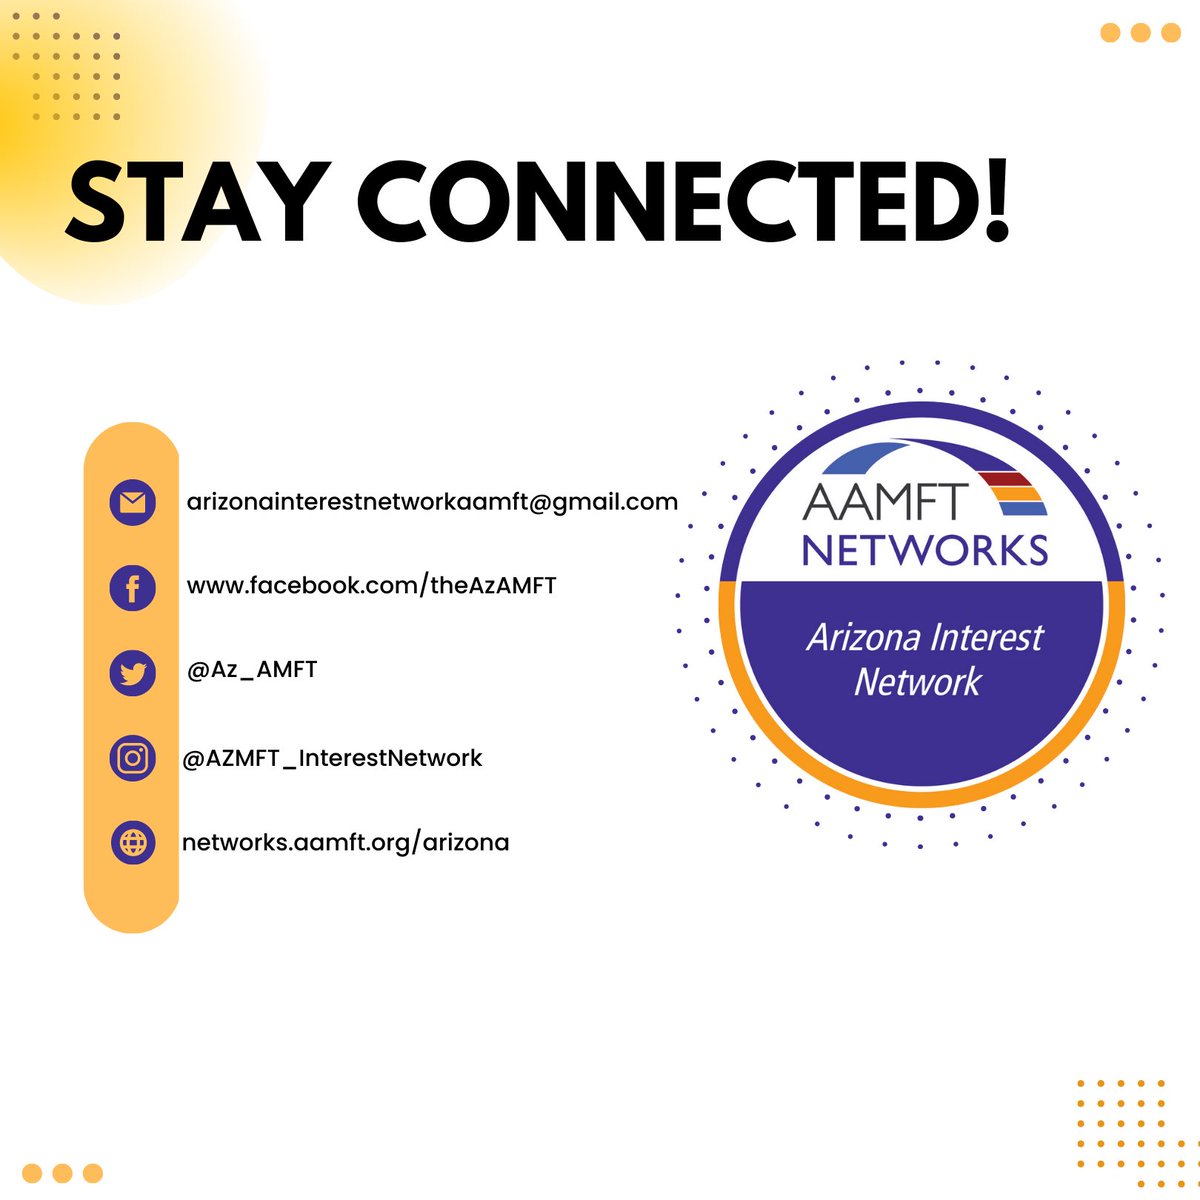 Stay Connected with us and never miss an update!

#aamft #azaamft #therapy #therapist #therapistsofinstagram #lmft #marriagetherapist #emdr #conference #arizona #phoenix #chandleraz #gilbertaz #scottsdale #laveen #paradisevalley #glendale #peoria #structuraltherapy